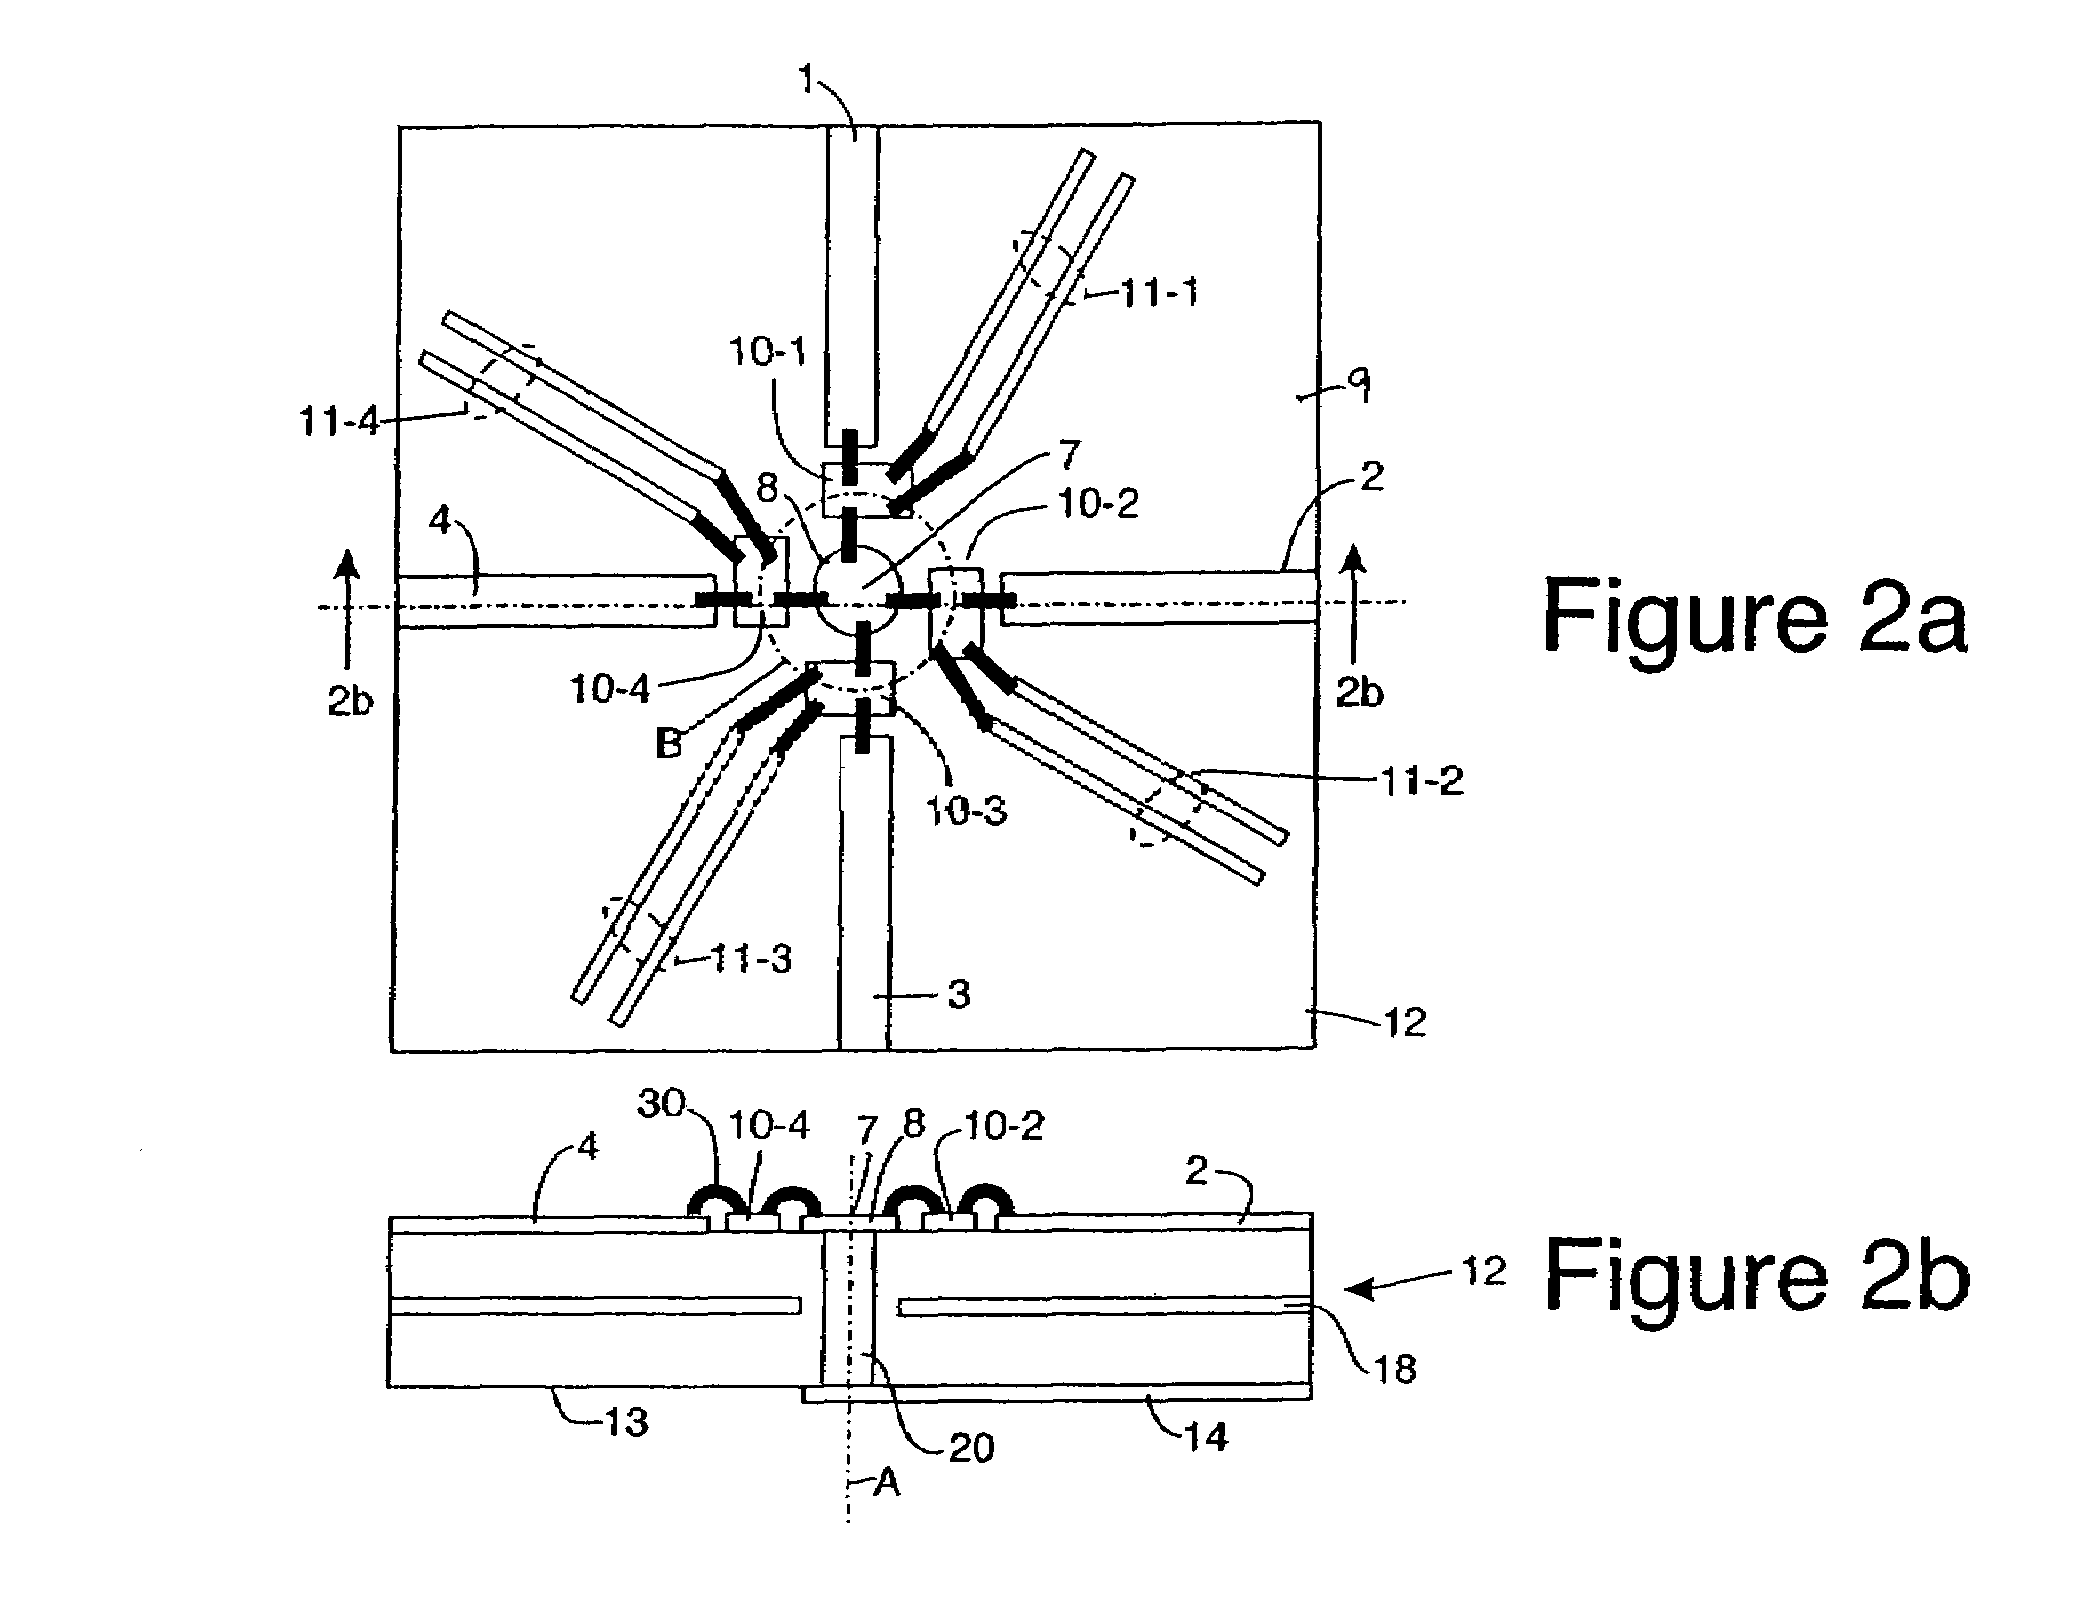 Single-pole multi-throw switch having low parasitic reactance, and an antenna incorporating the same